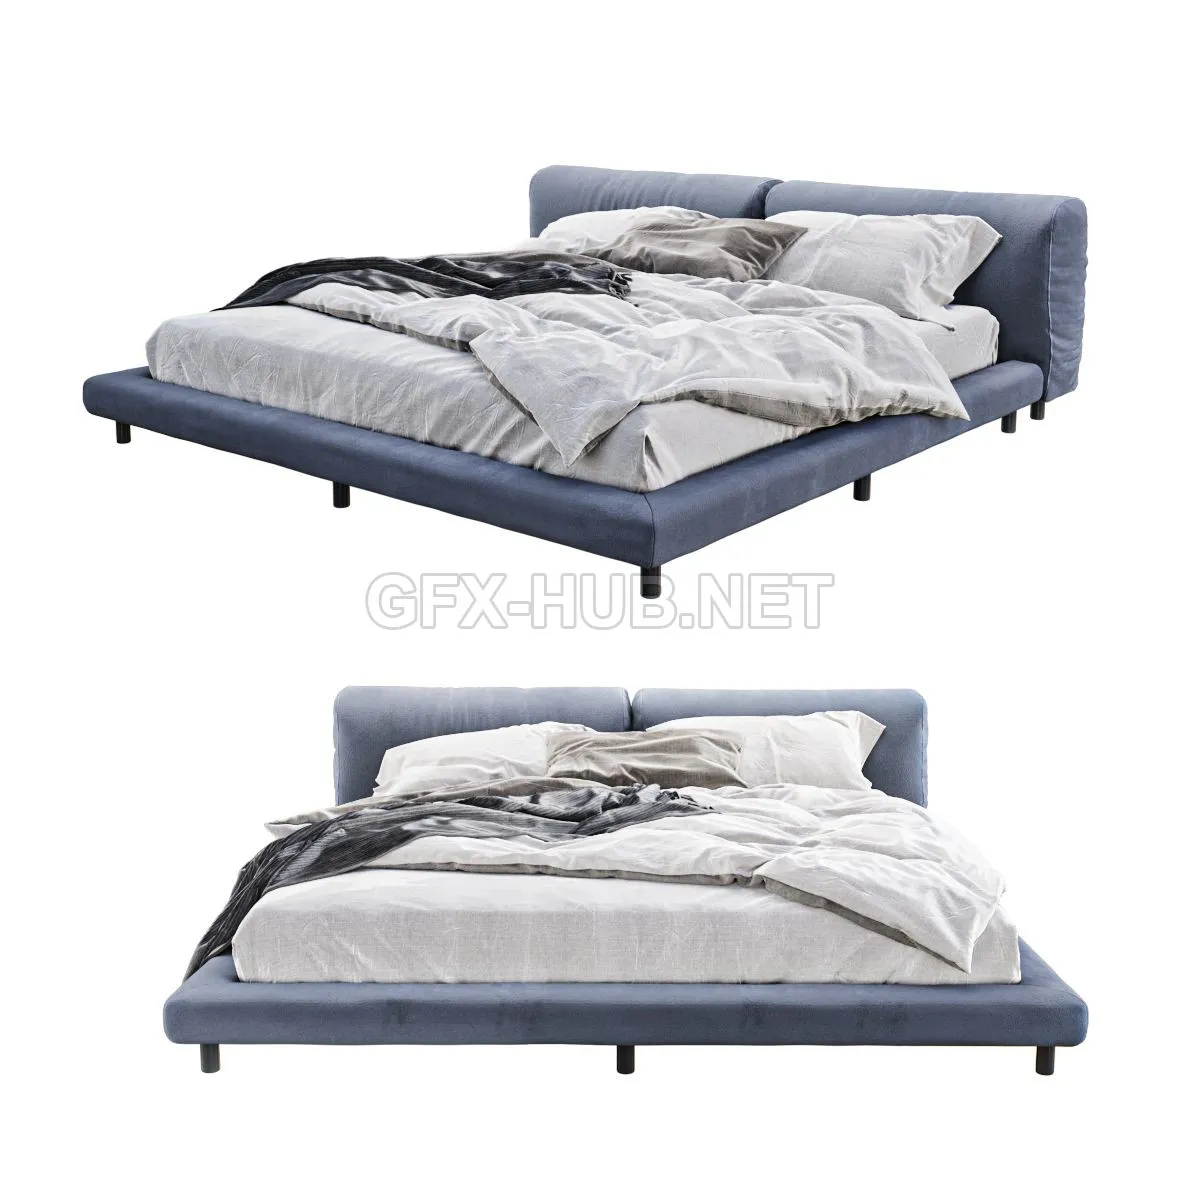 Bed Softwall – 207781